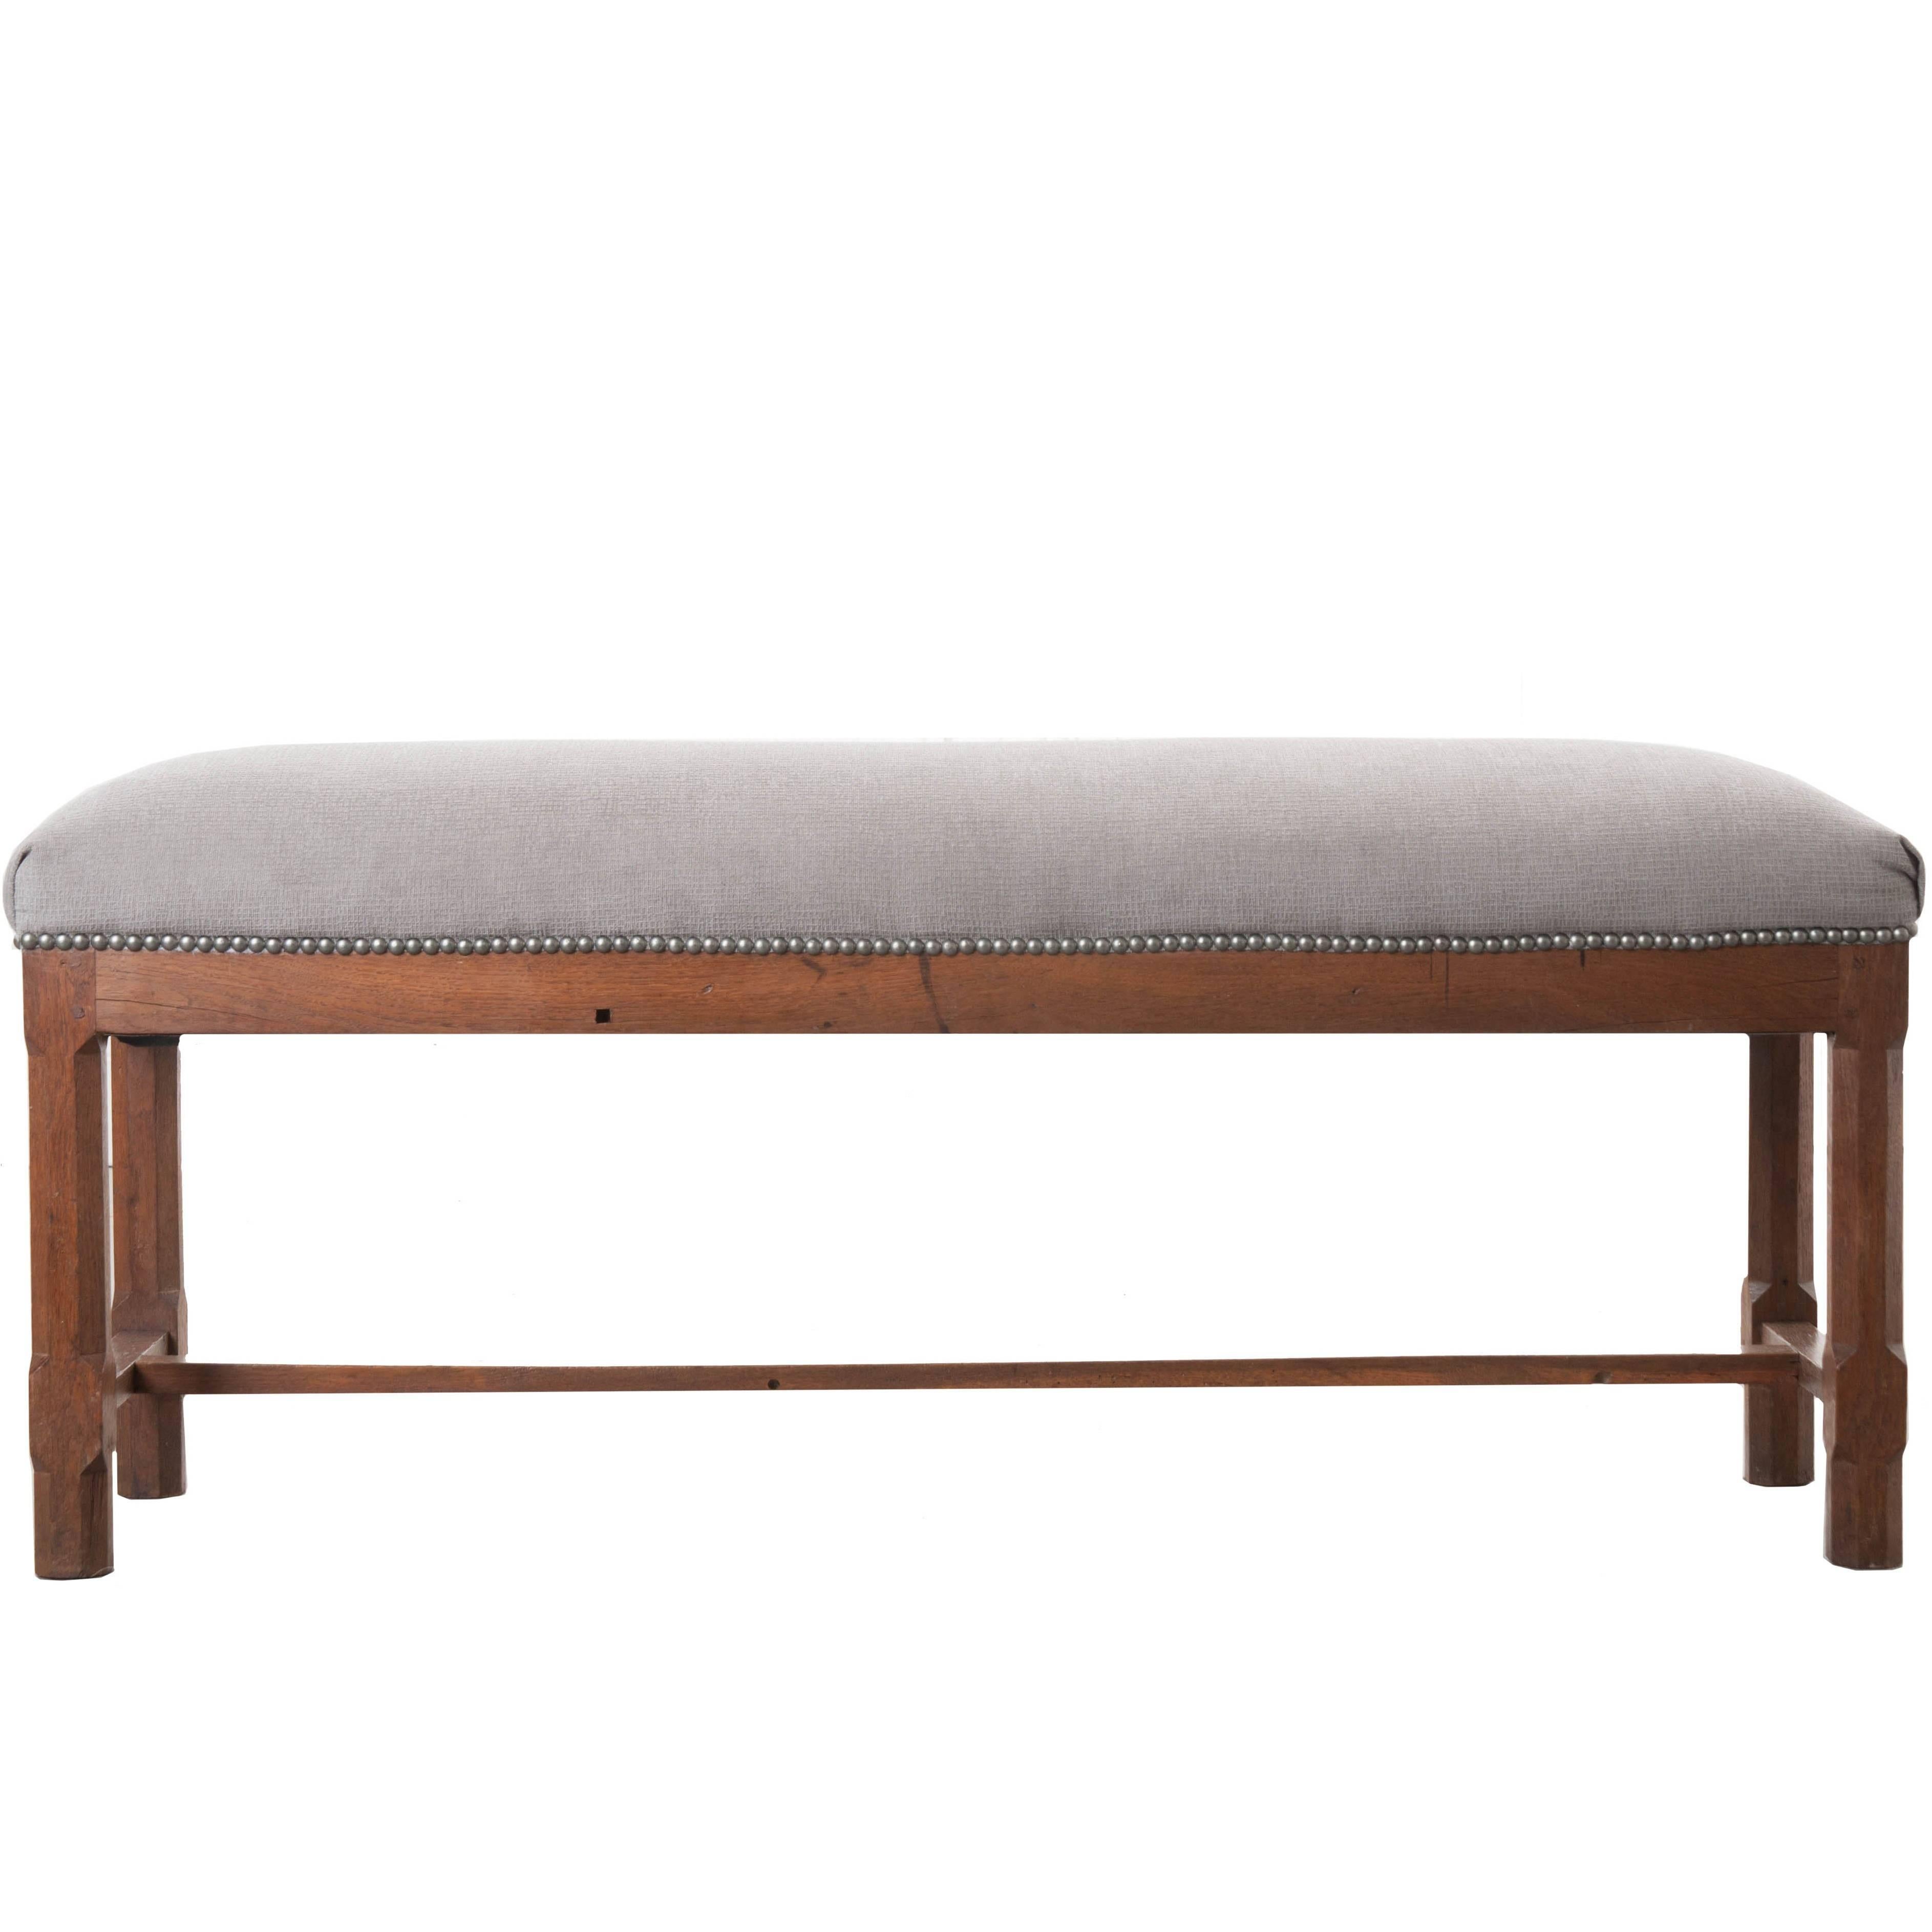 French 19th Century Upholstered Oak Bench